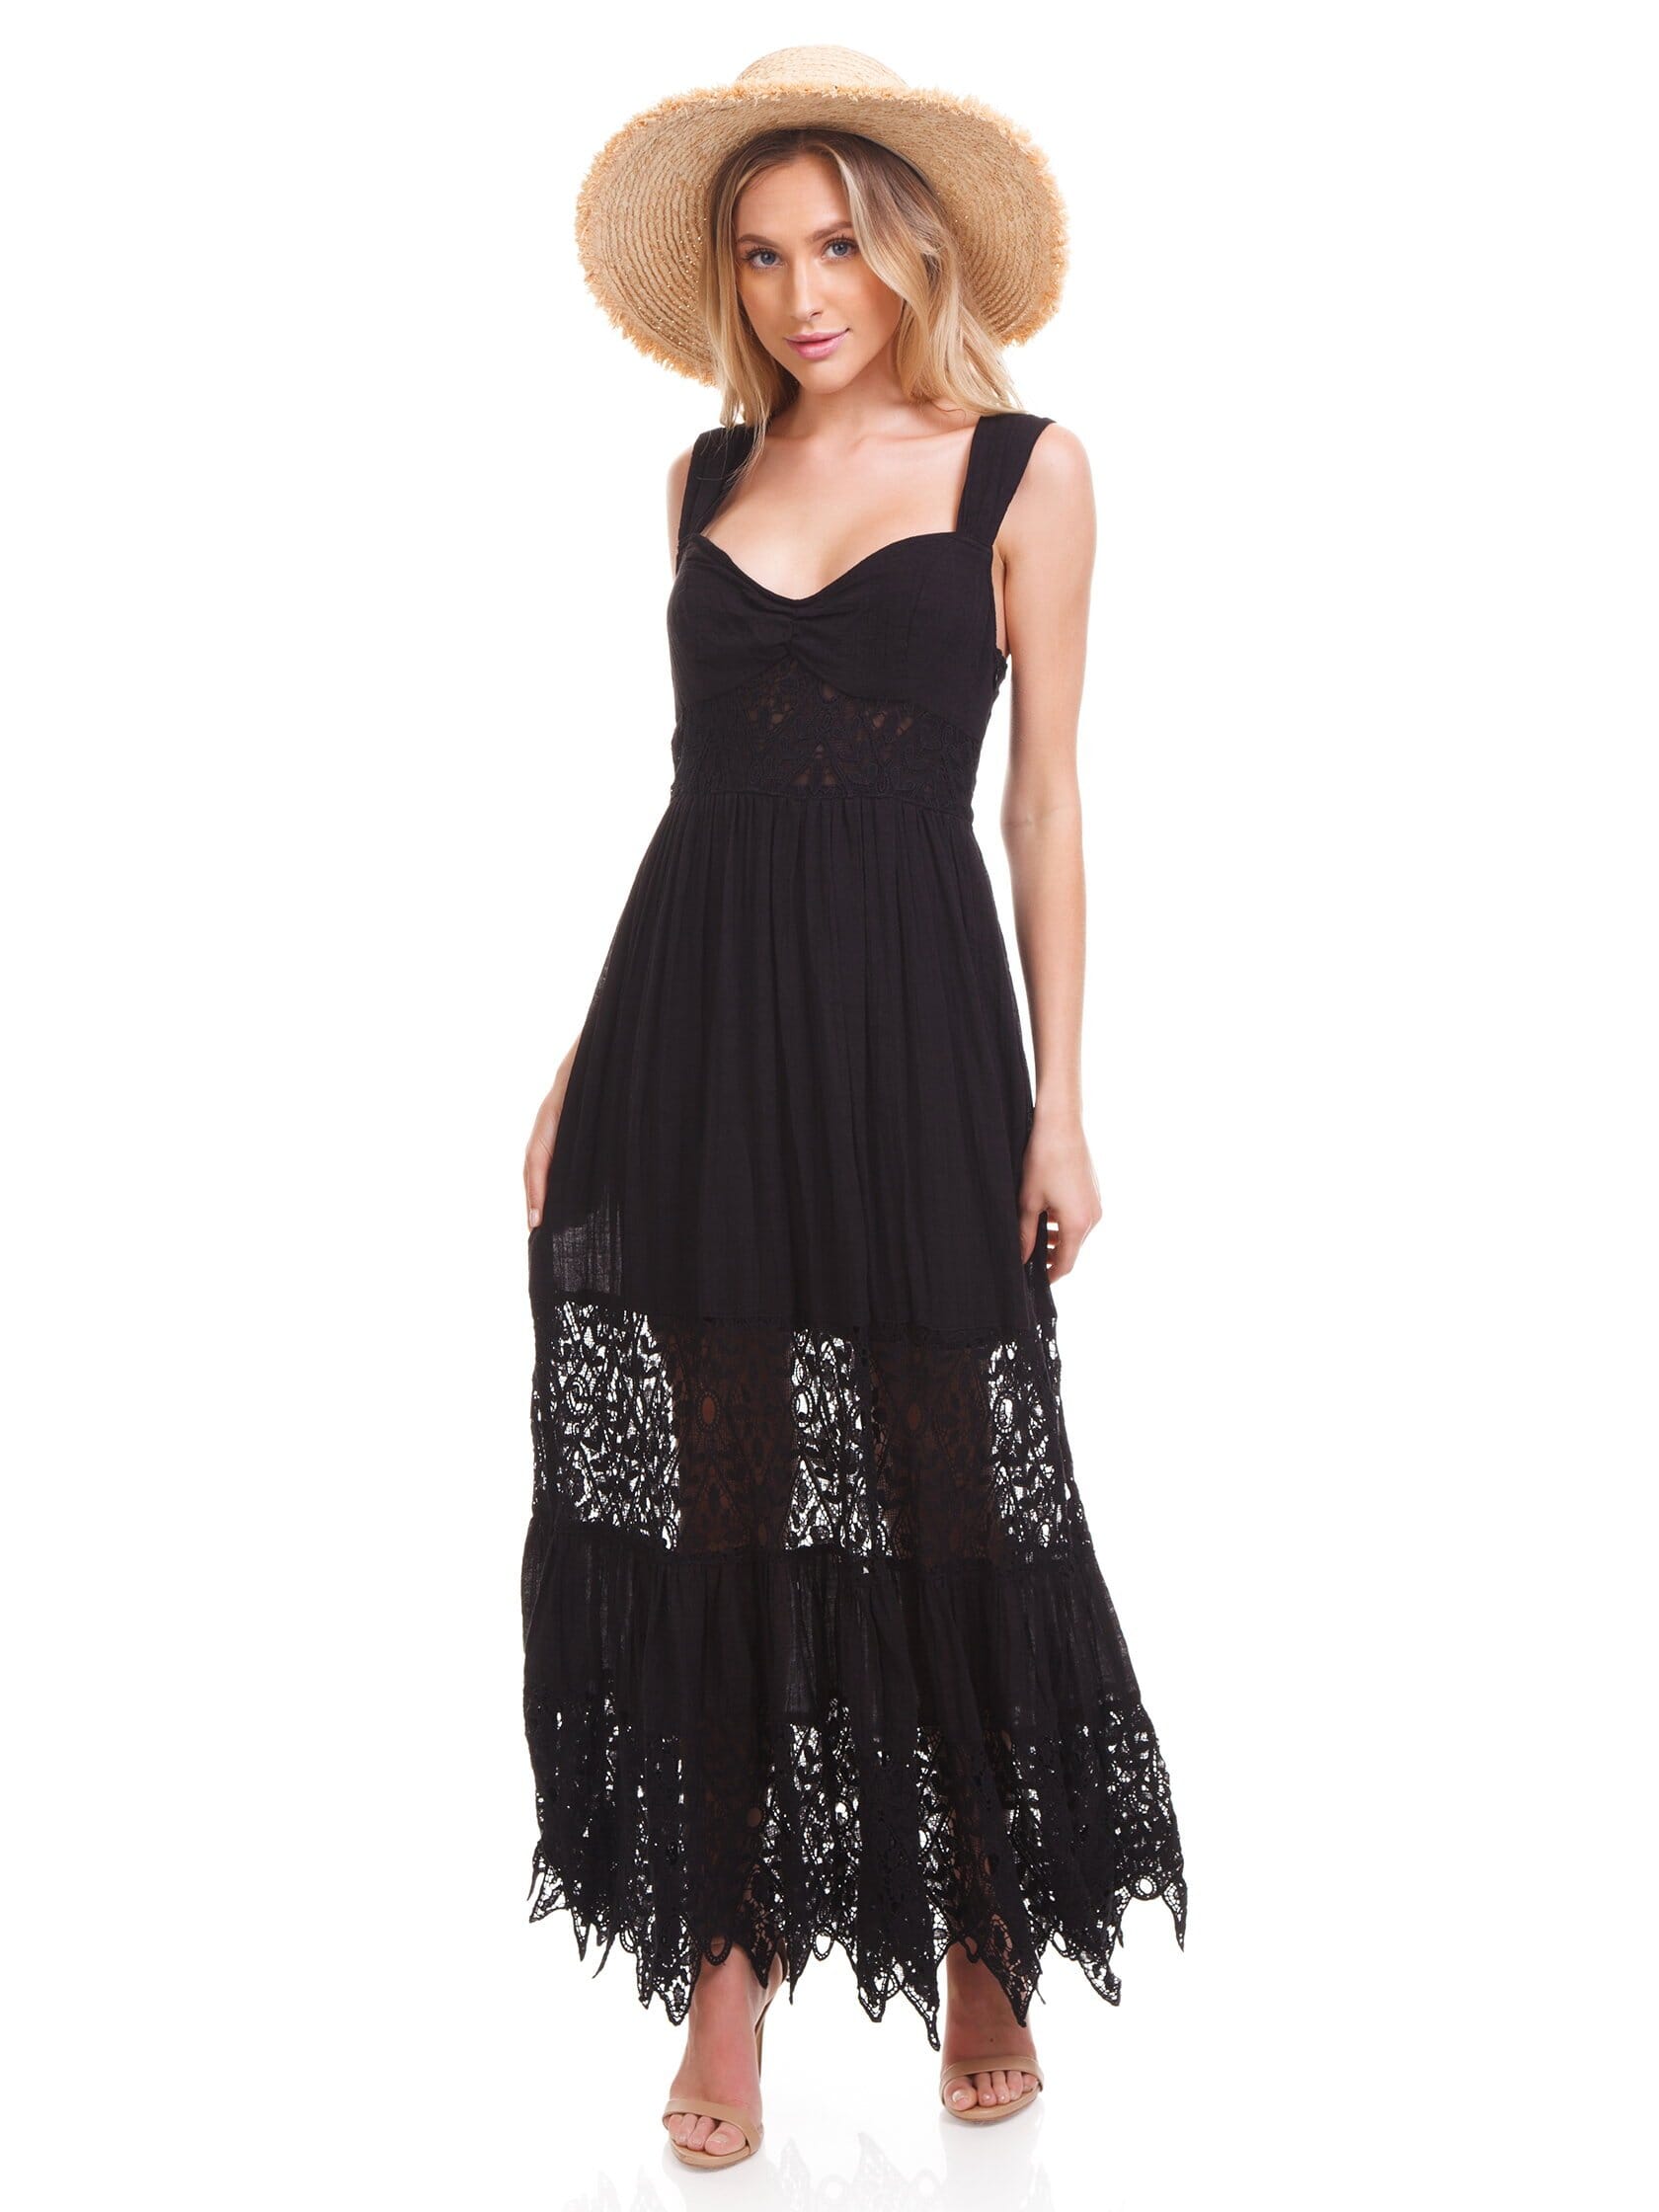 Free People Caught Your Eye Maxi Dress in Black